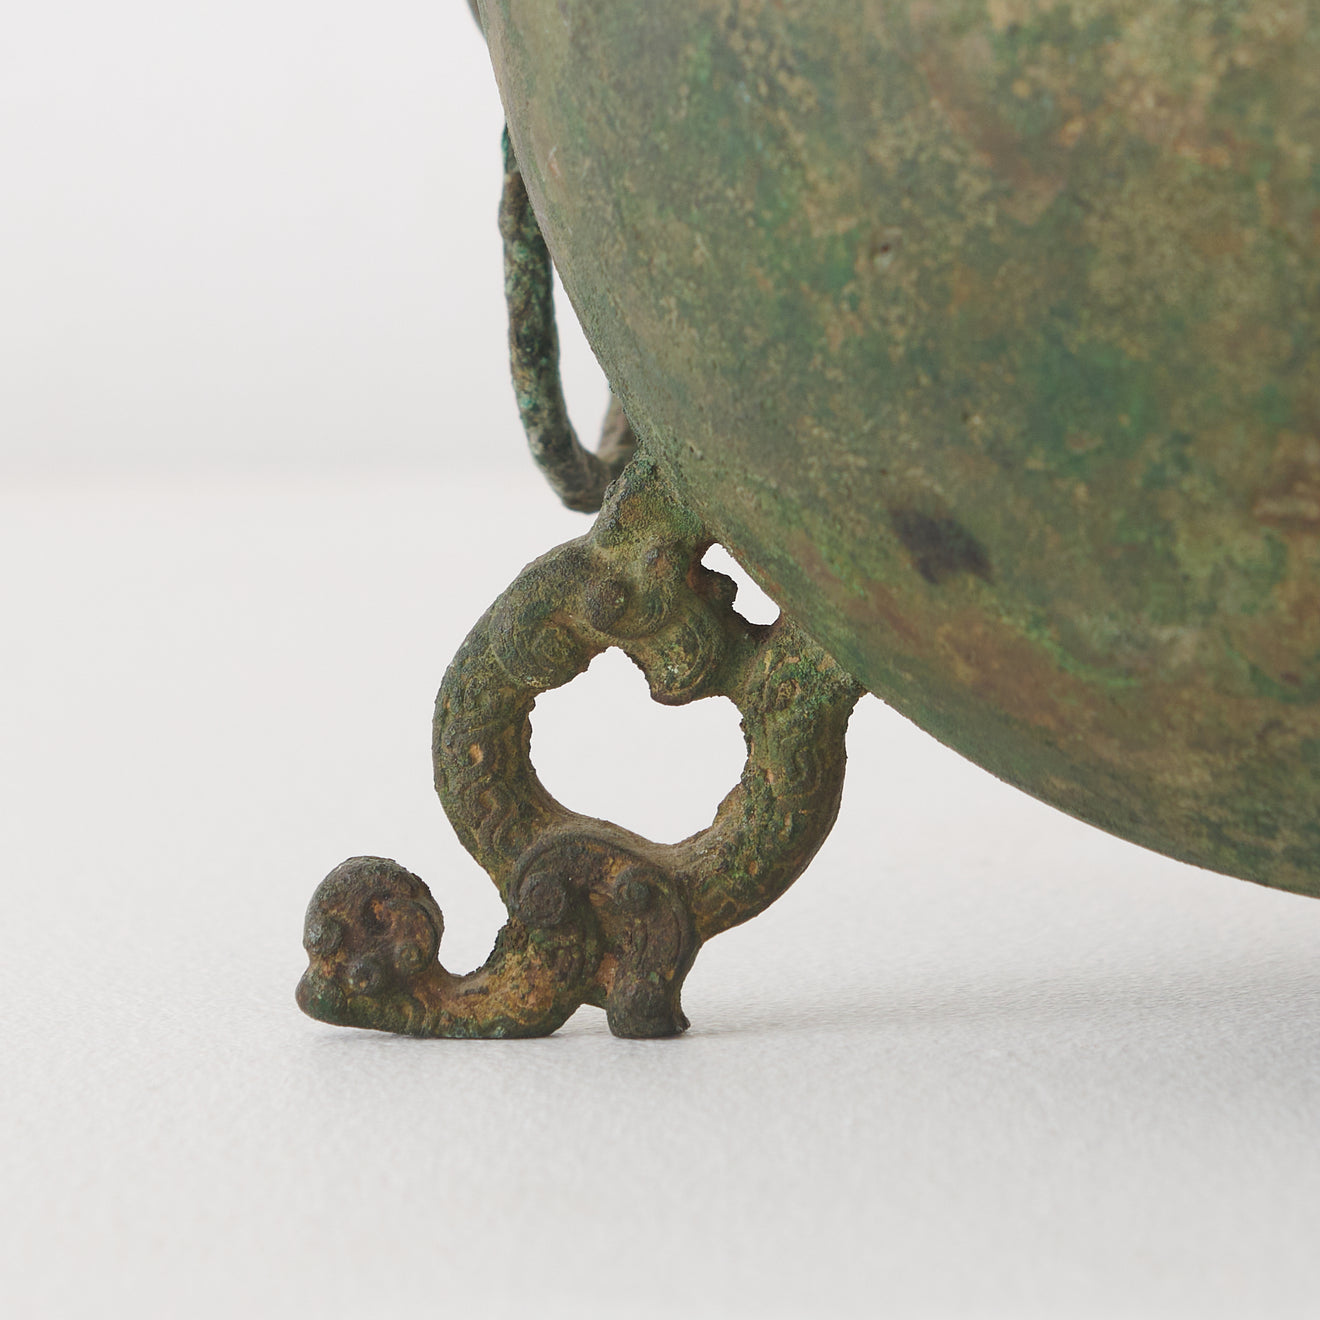 ANCIENT CHINESE BRONZE RITUAL VESSEL WITH TWIG HANDLES